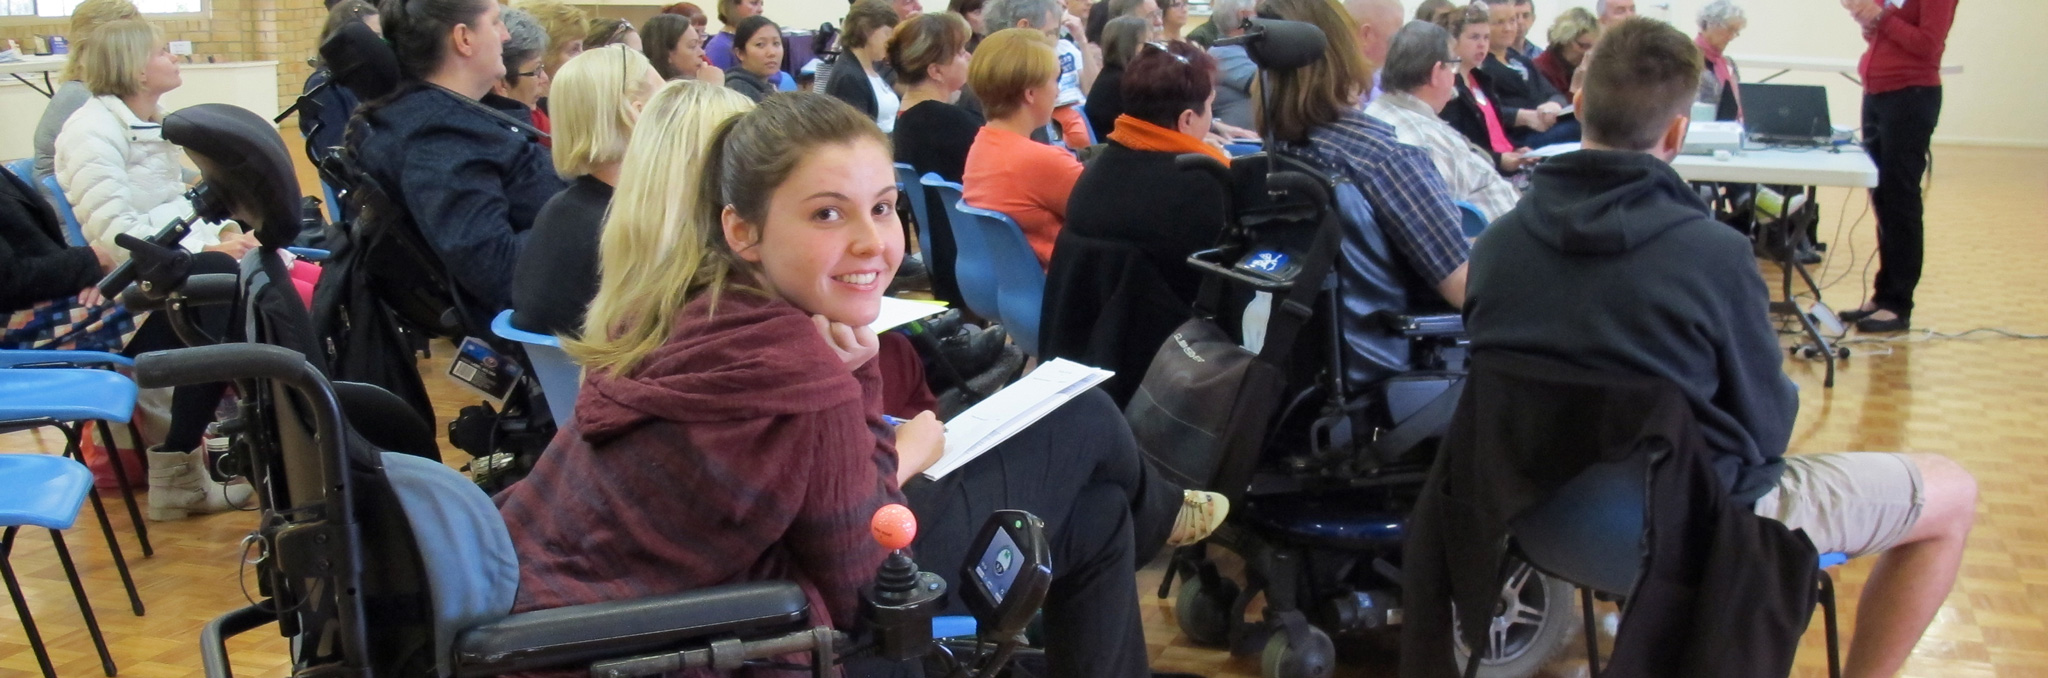 Smiling young lady in a wheelchair at an event